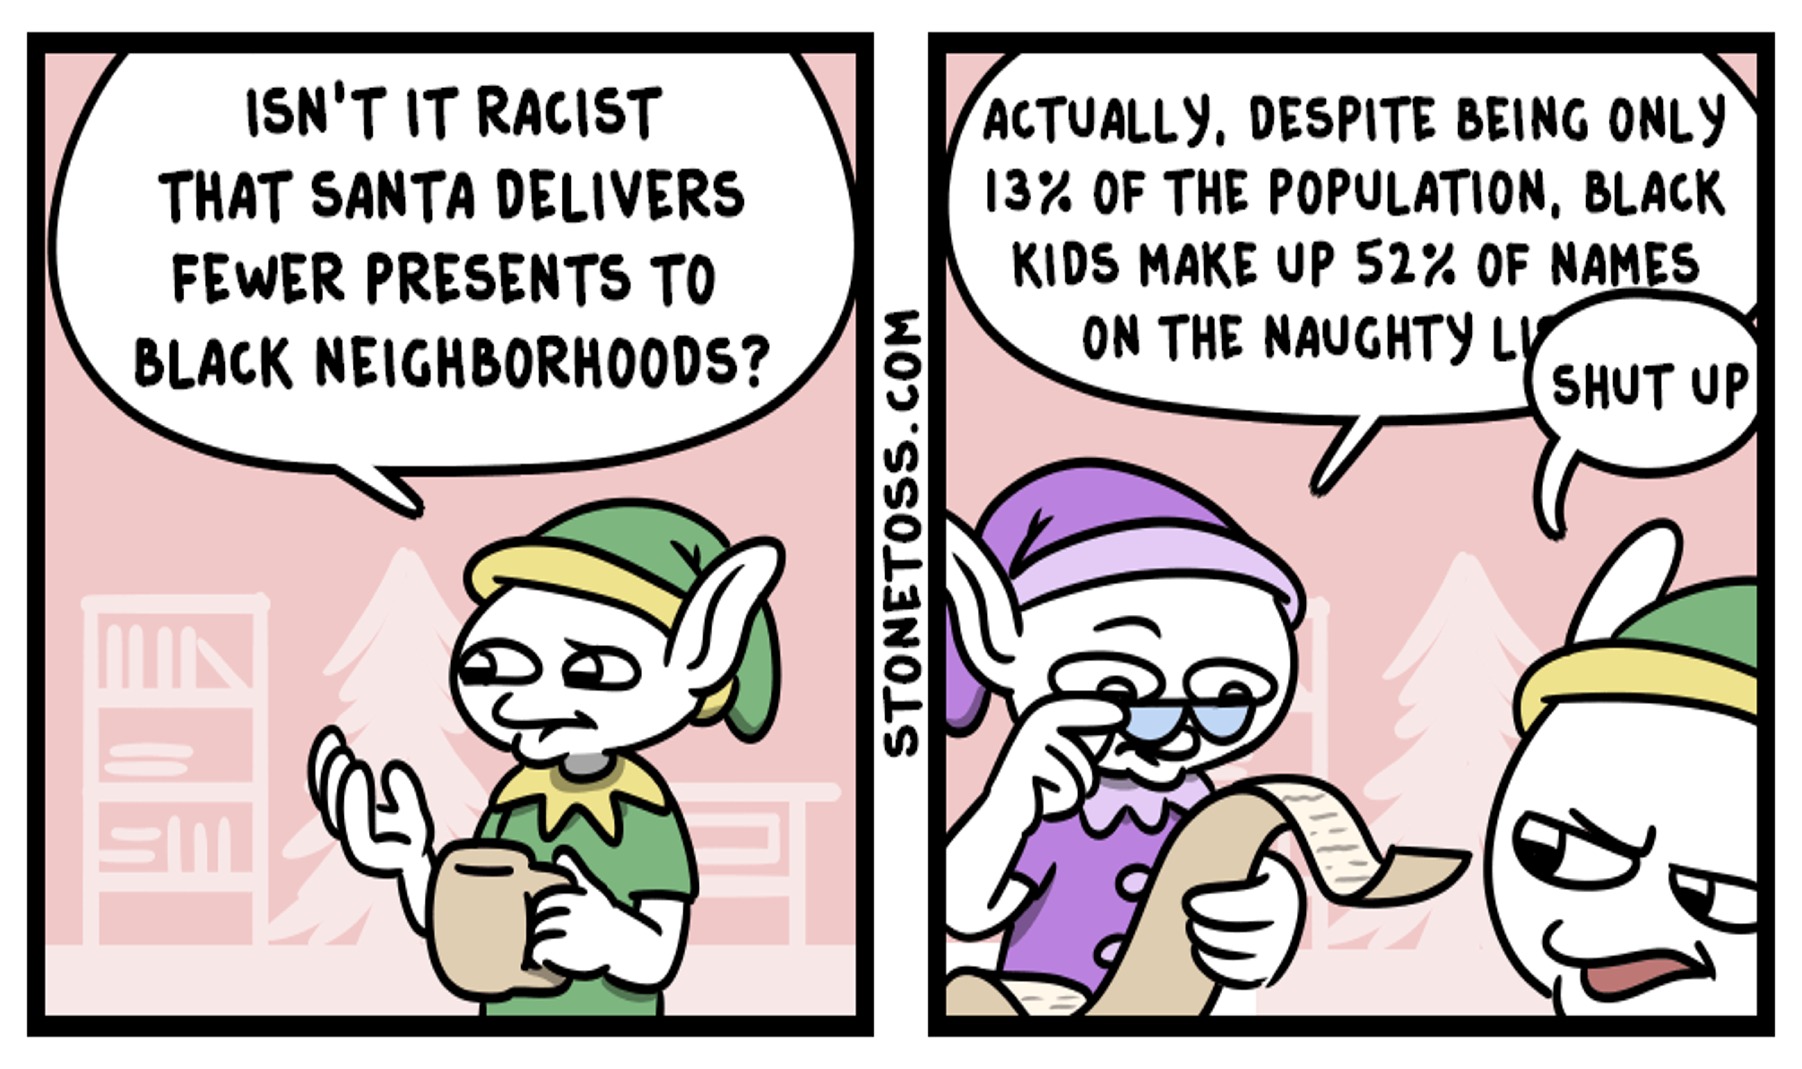 memes - stonetoss comics - Isn'T It Racist That Santa Delivers Fewer Presents To Black Neighborhoods? Actually, Despite Being Only 13% Of The Population, Black Kids Make Up 52% Of Names On The Naughty Ly. Shut Up Stonetoss.Com